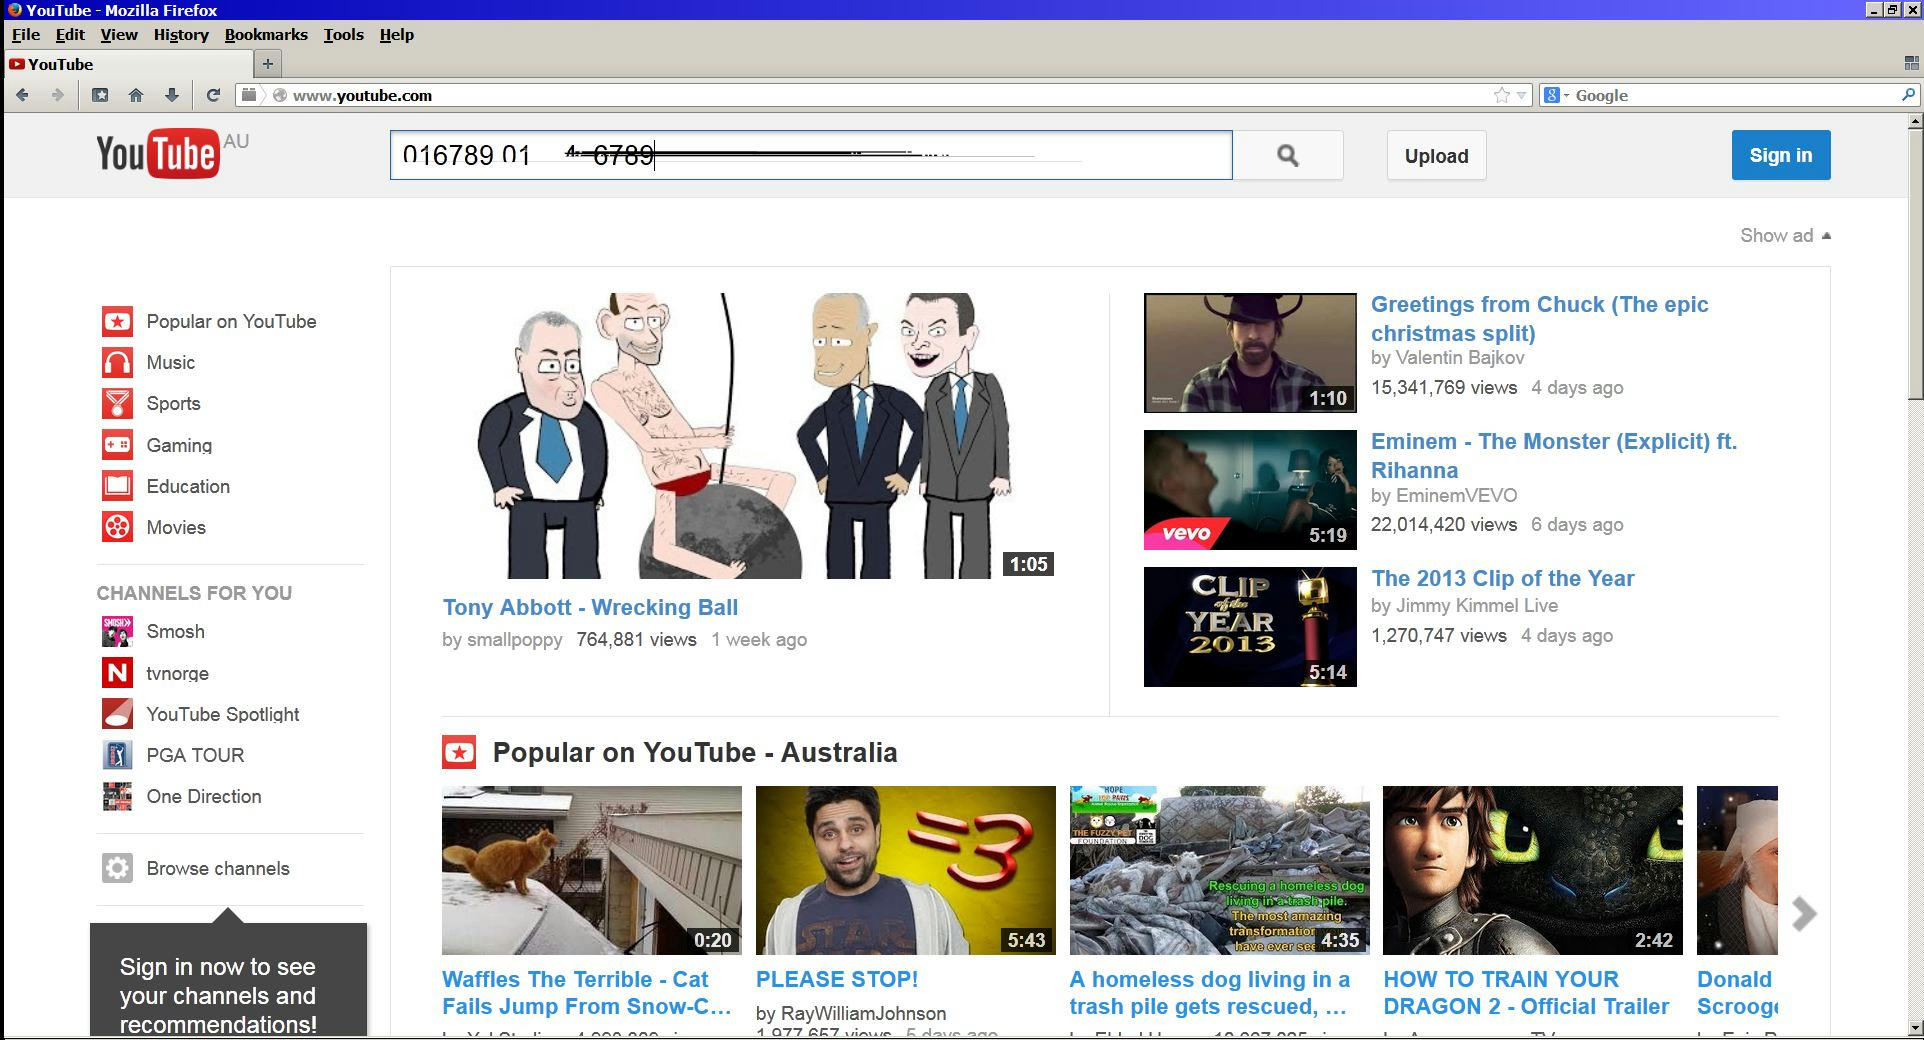 weird number text in youtube search bar - On the web